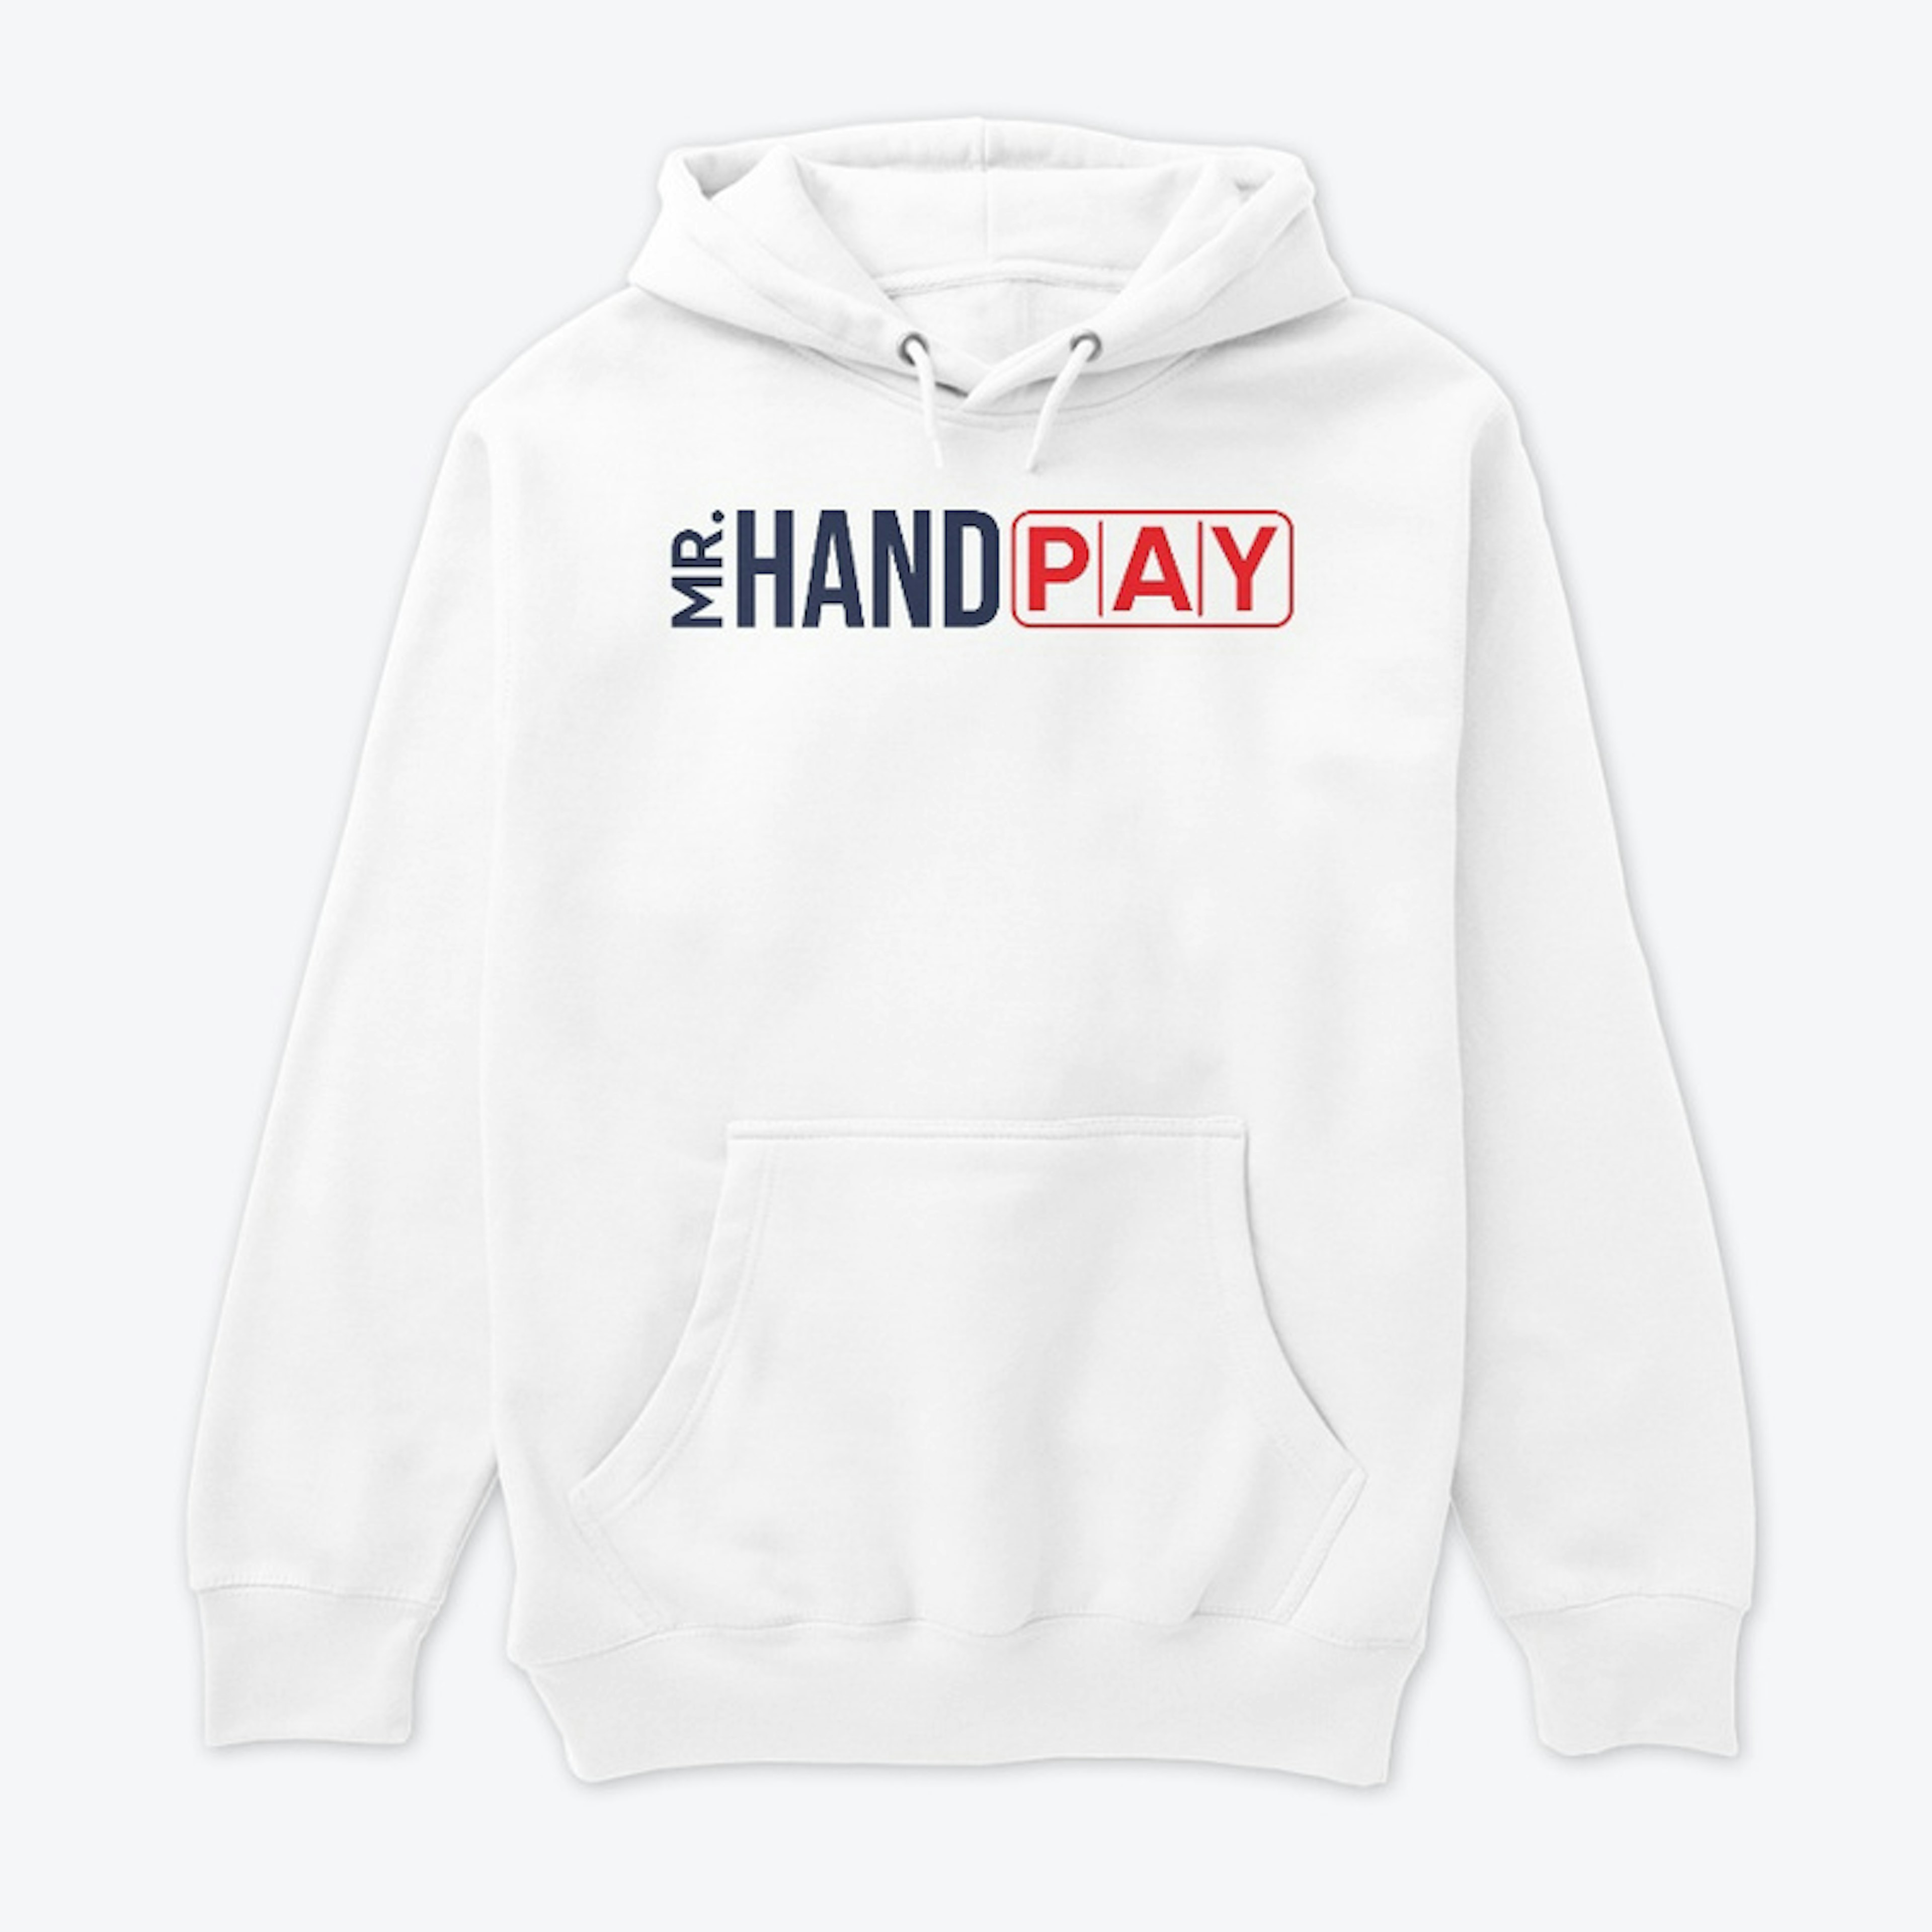 Mr Hand Pay